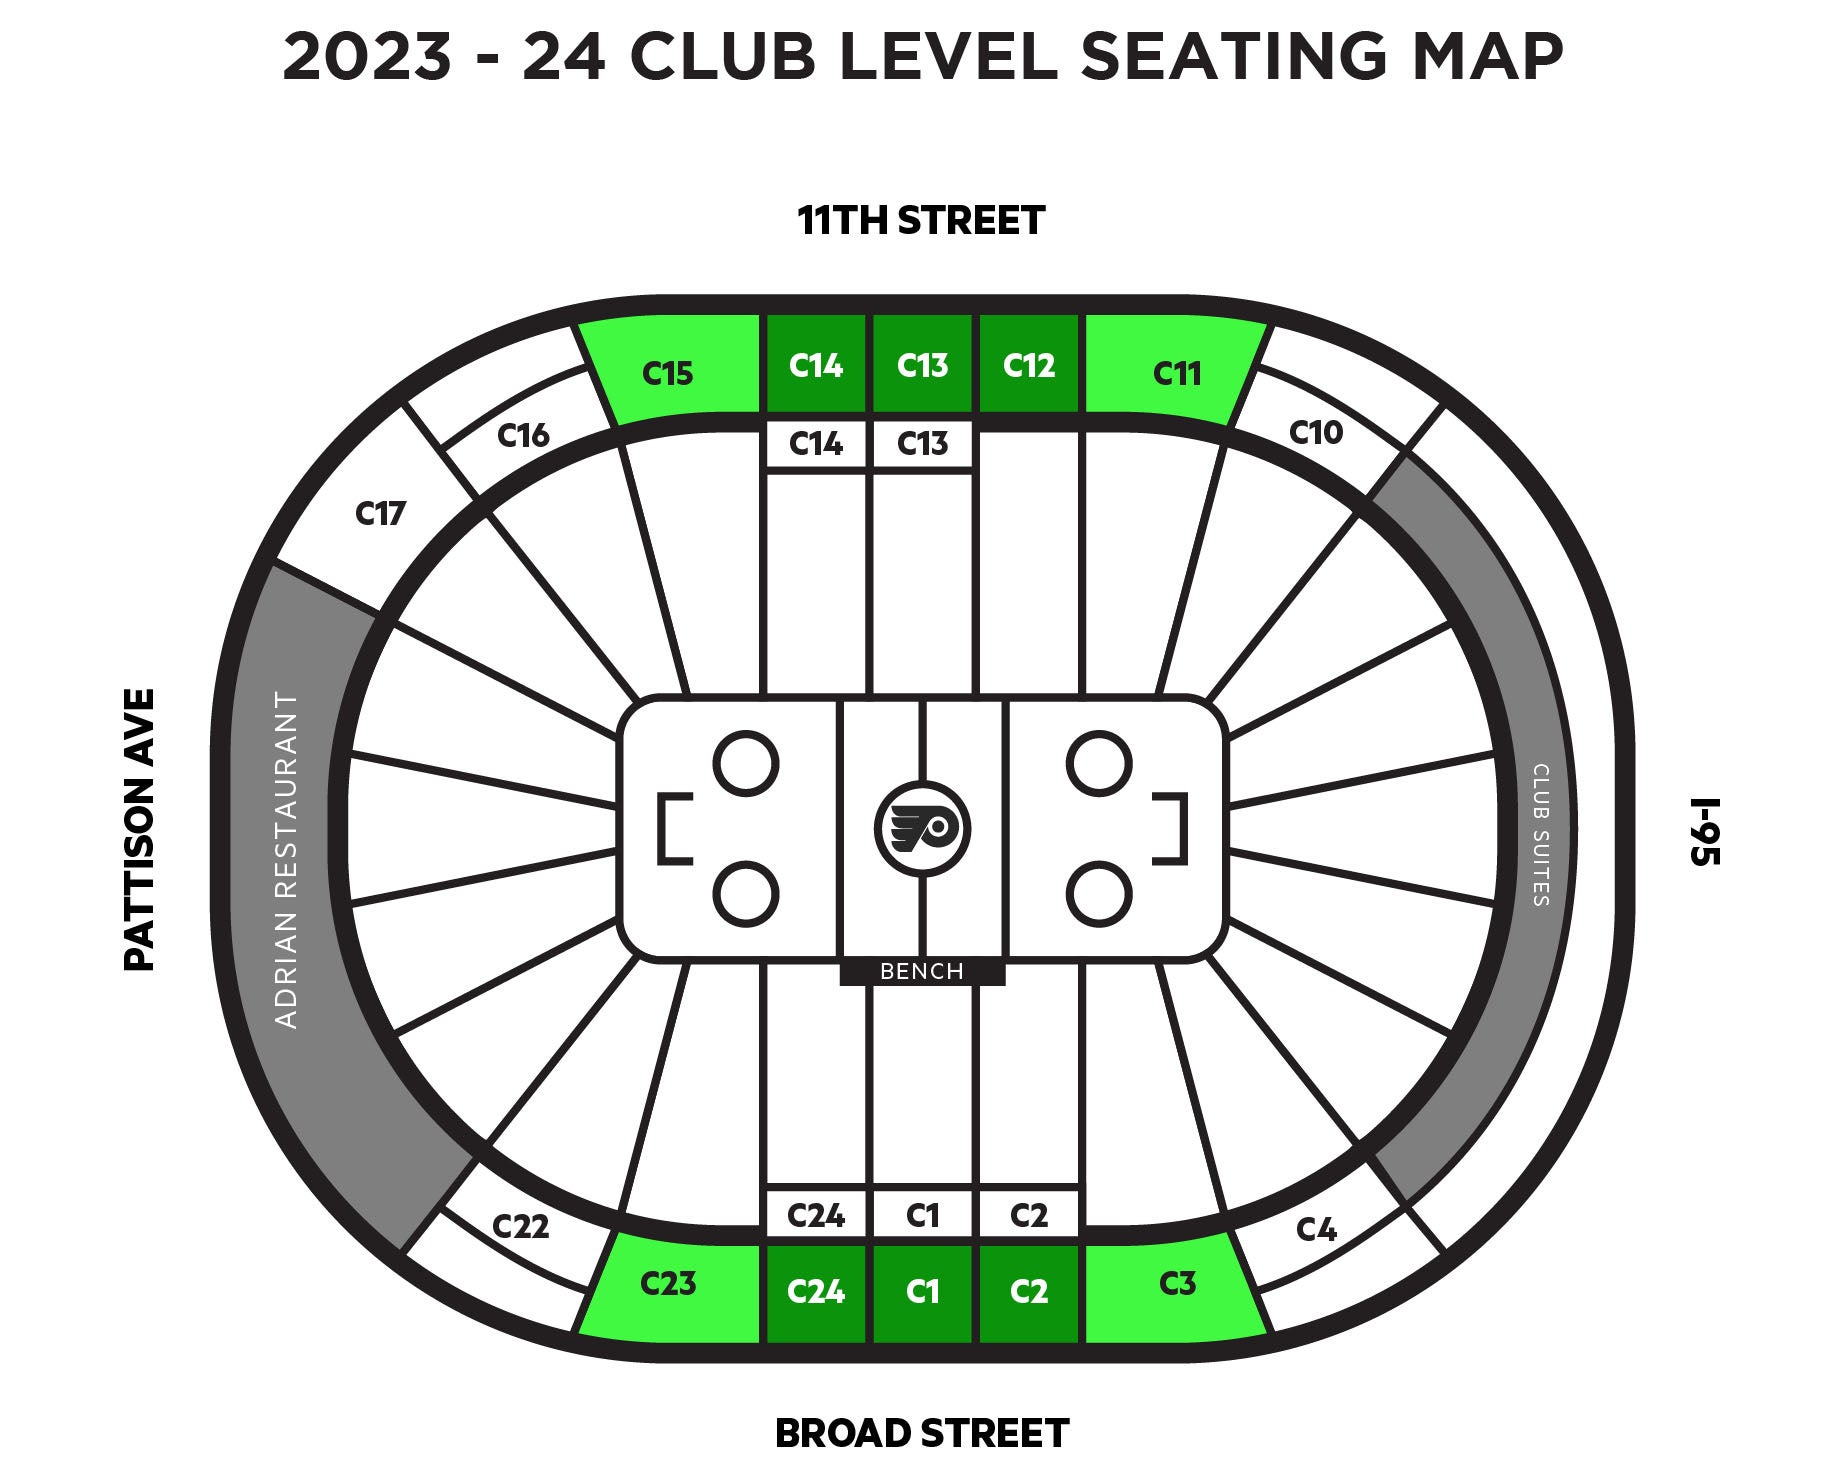 Updated Club Level Seating Map smaller.jpg